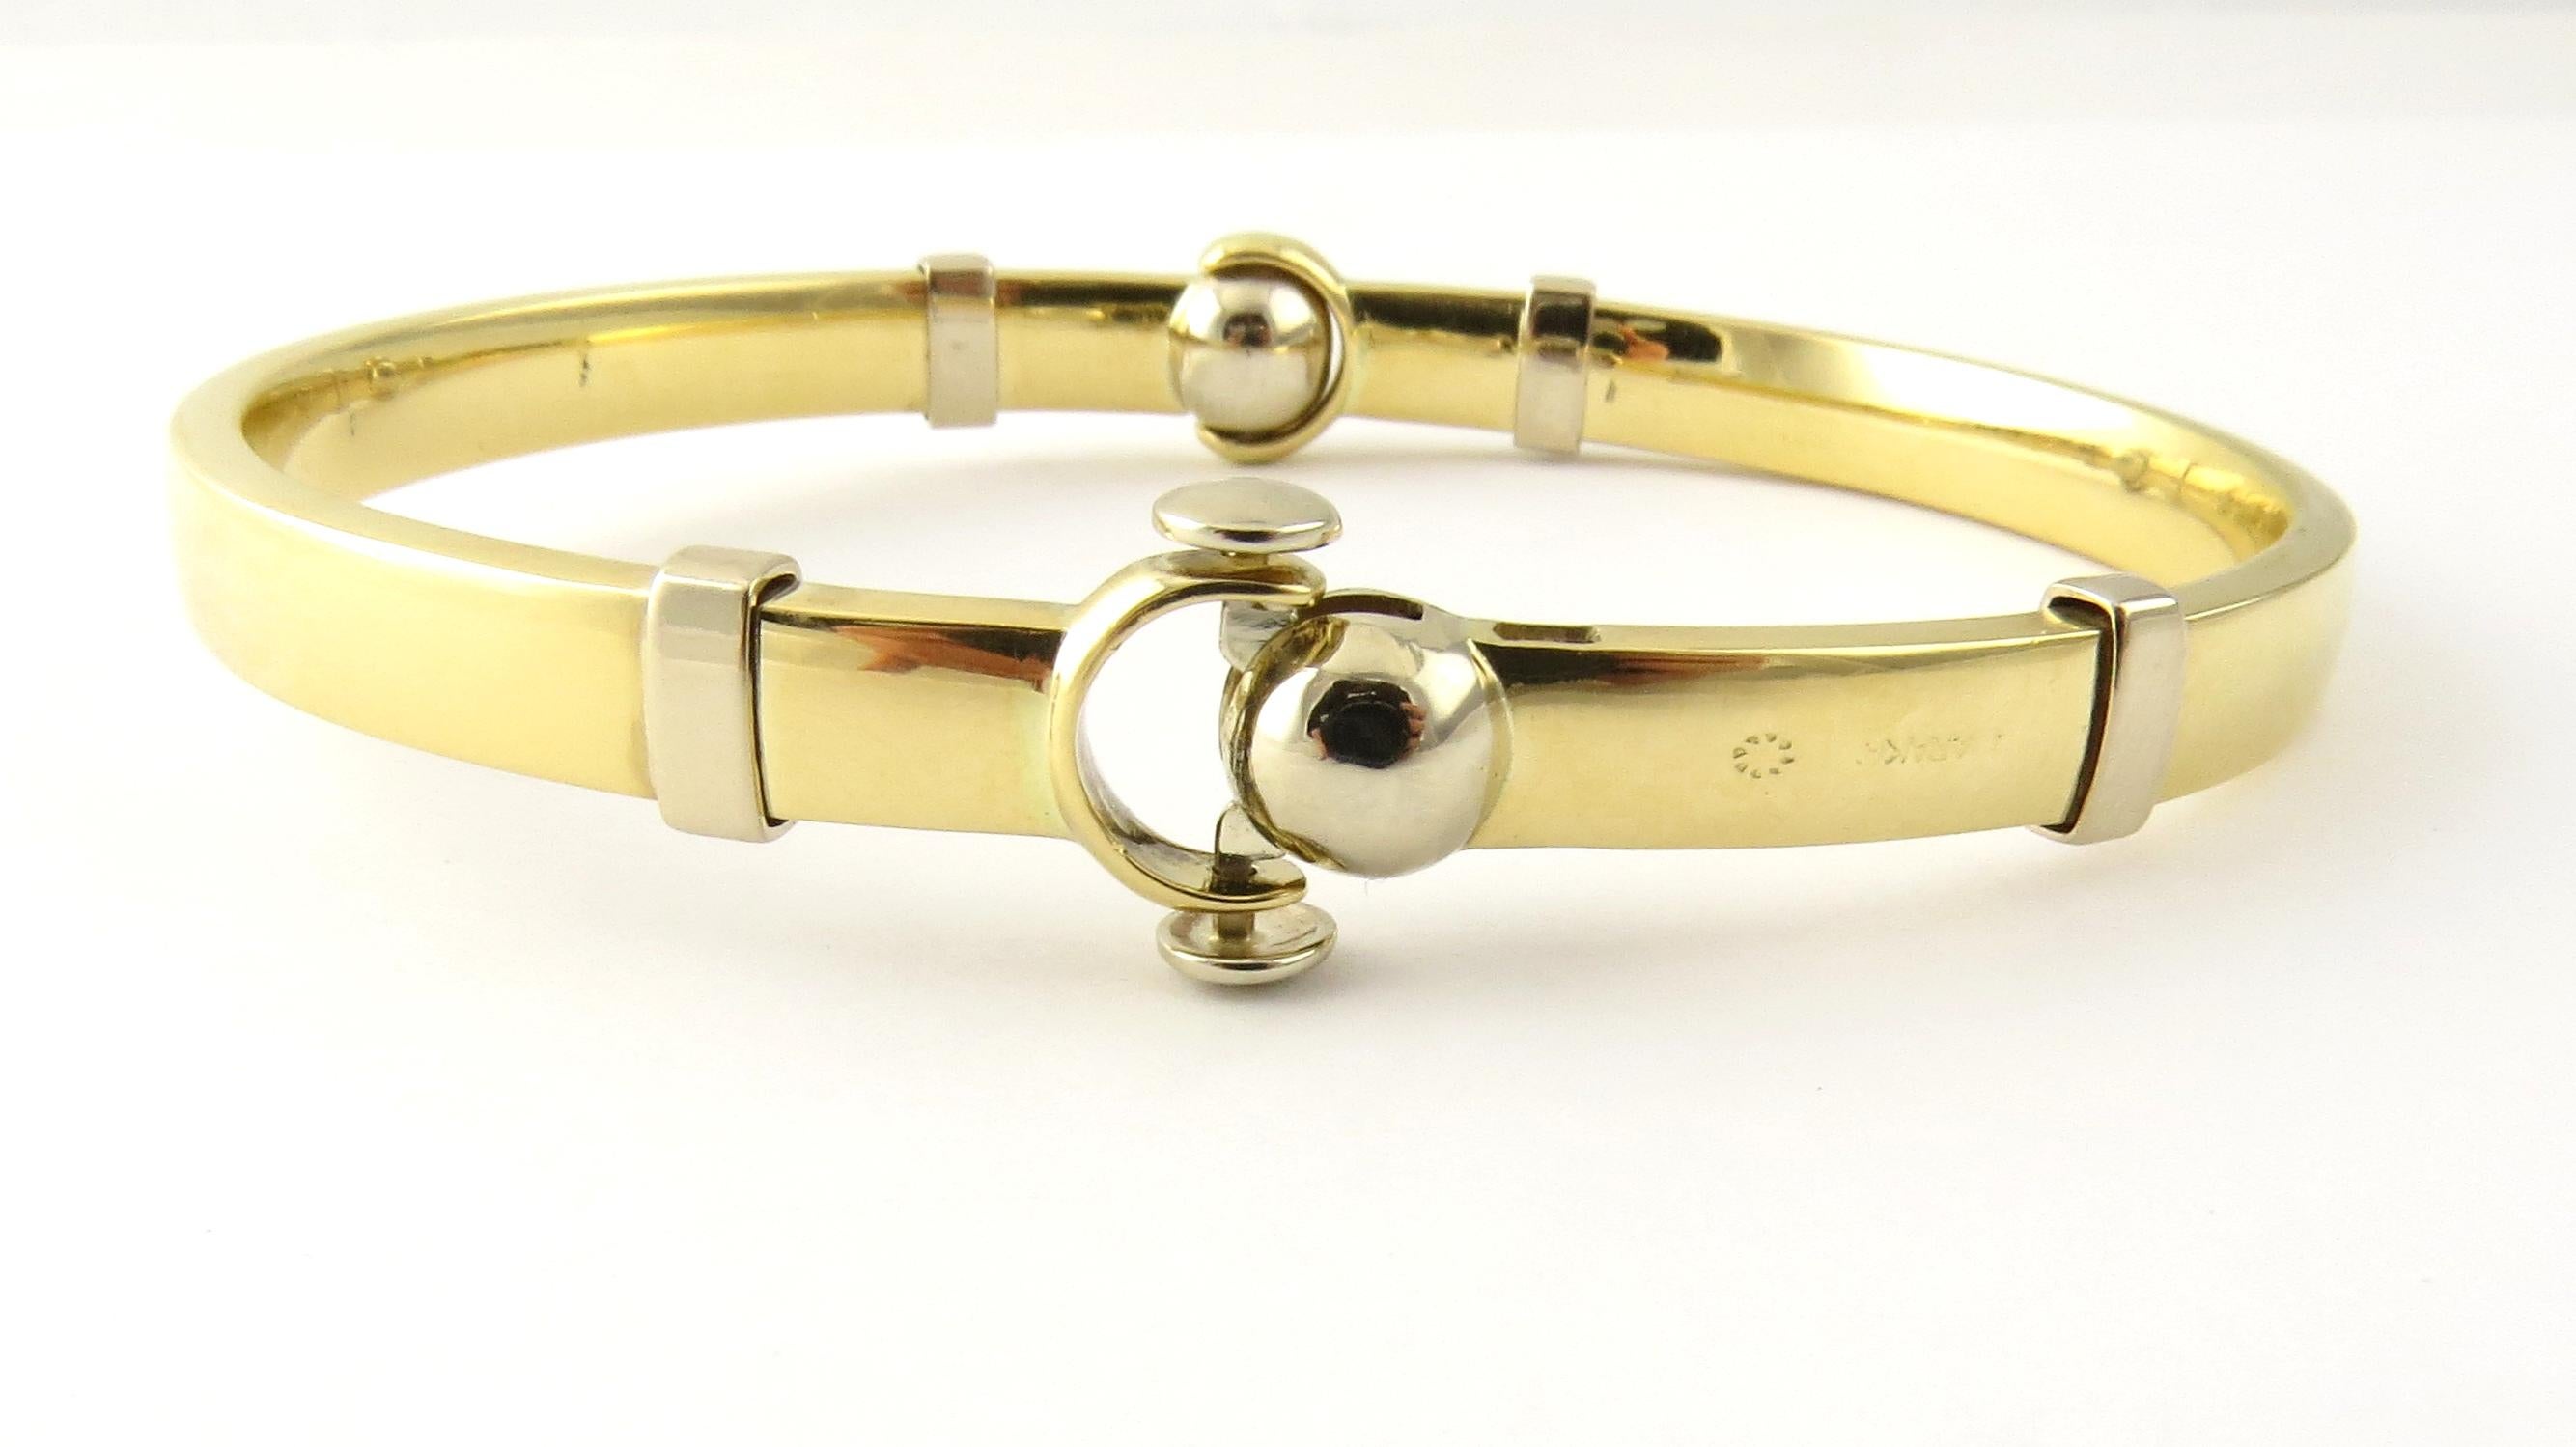 Vintage 18 Karat Yellow Gold Bangle Bracelet

This elegant hinged bangle bracelet is meticulously crafted in classic 18K yellow gold. Width: 8 mm.

Size: 7.5 inches

Weight: 13.9 dwt. / 21.7 gr.

Stamped: 750

Very good condition, professionally